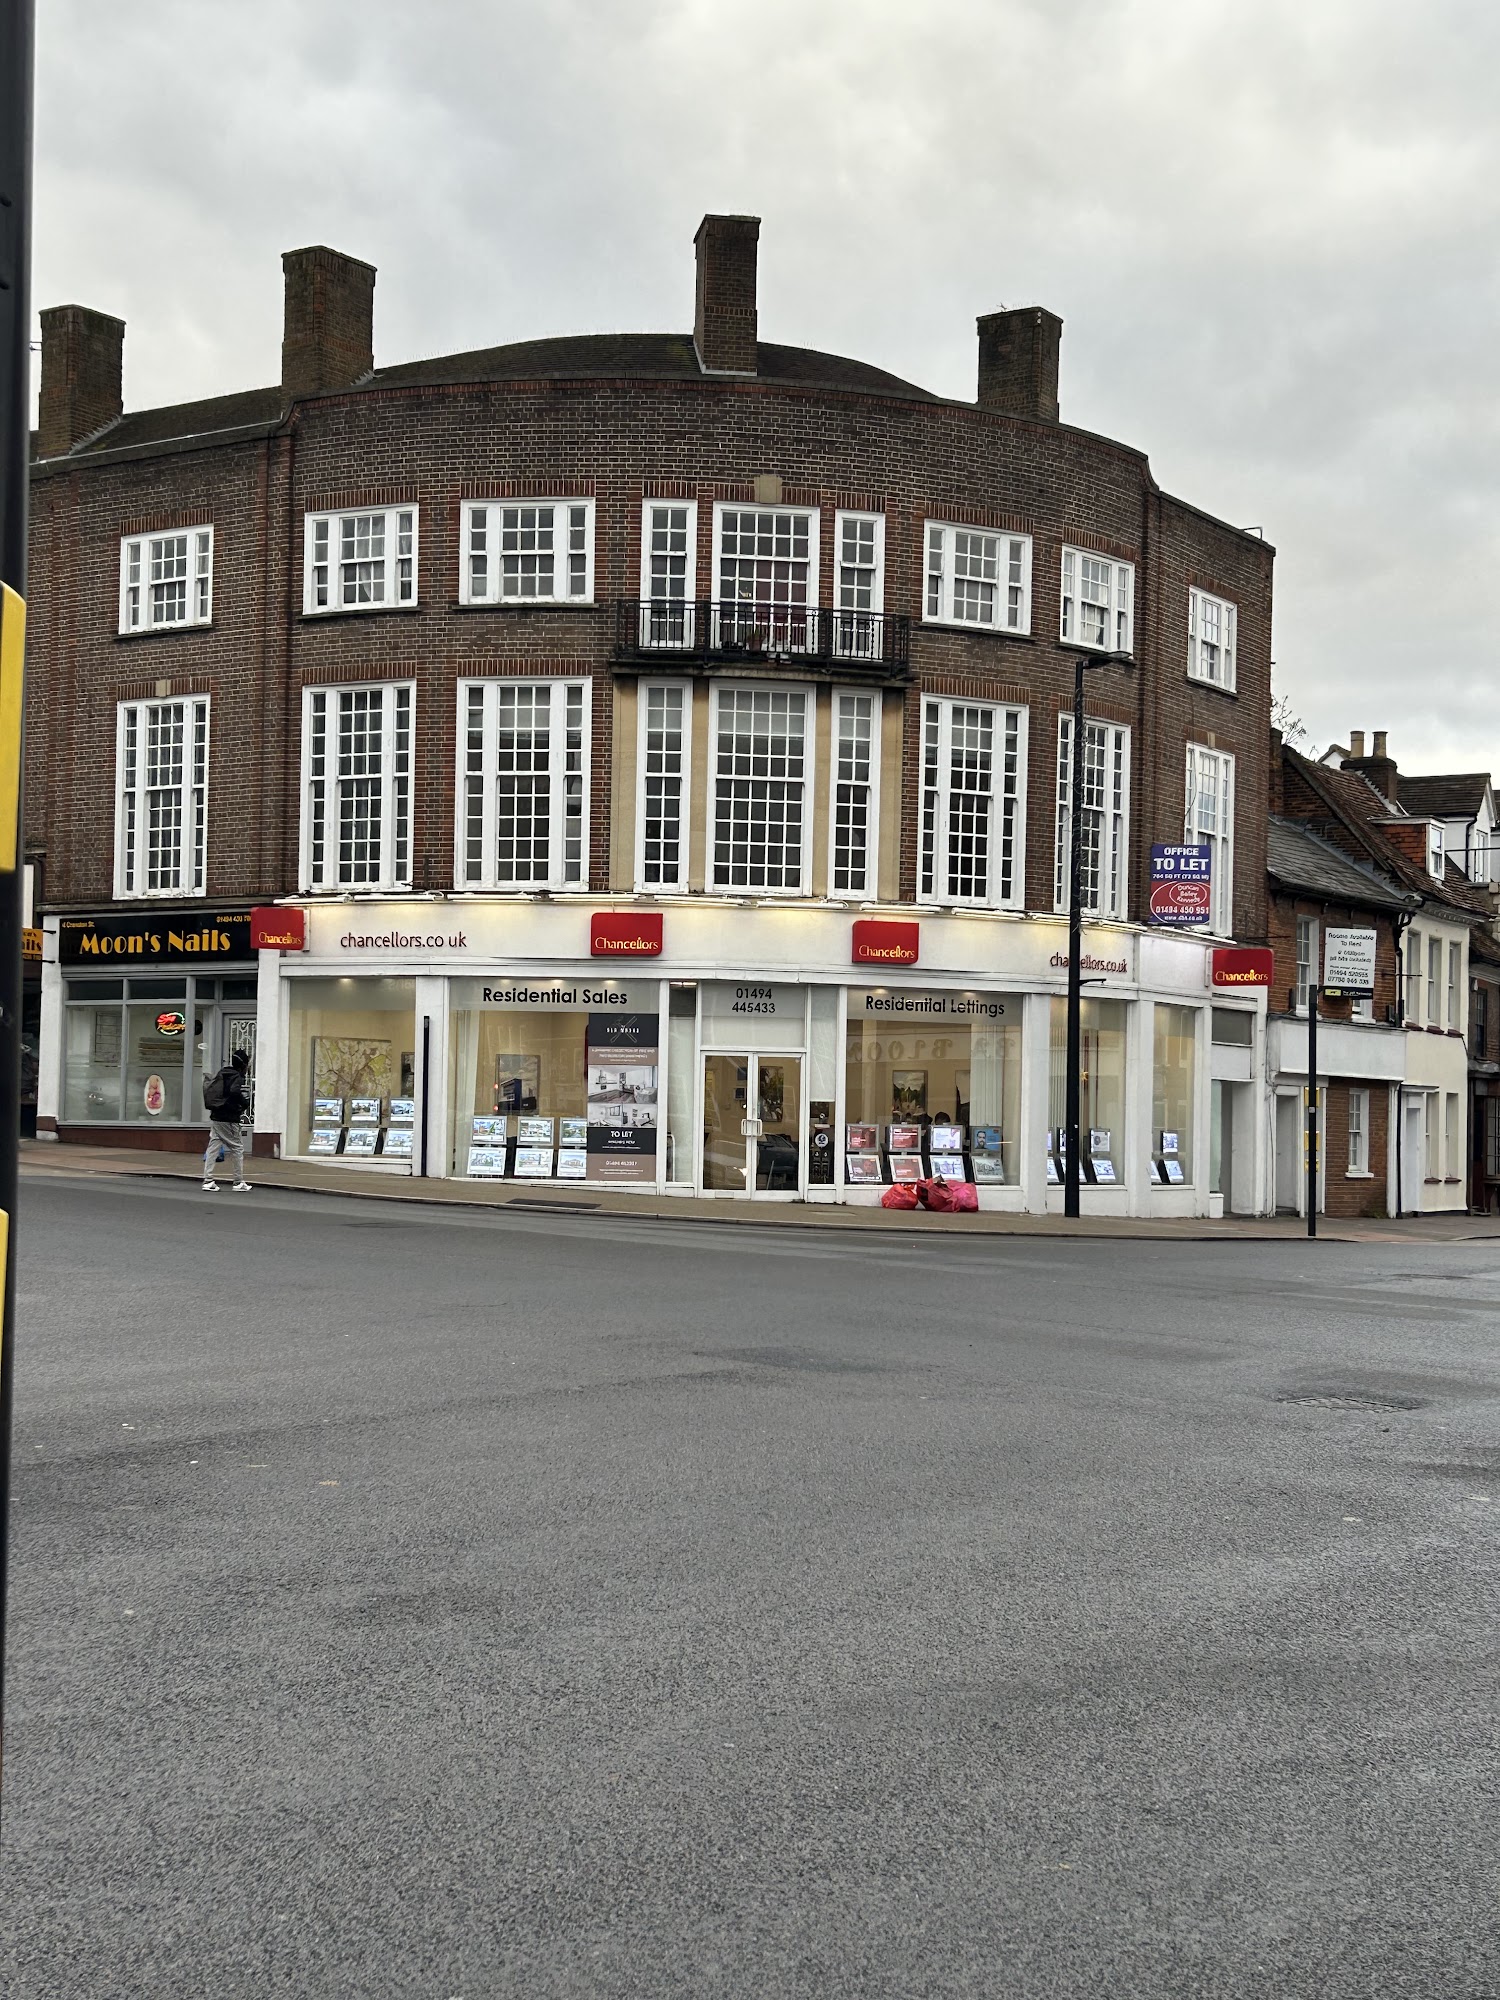 Chancellors - High Wycombe Estate Agents